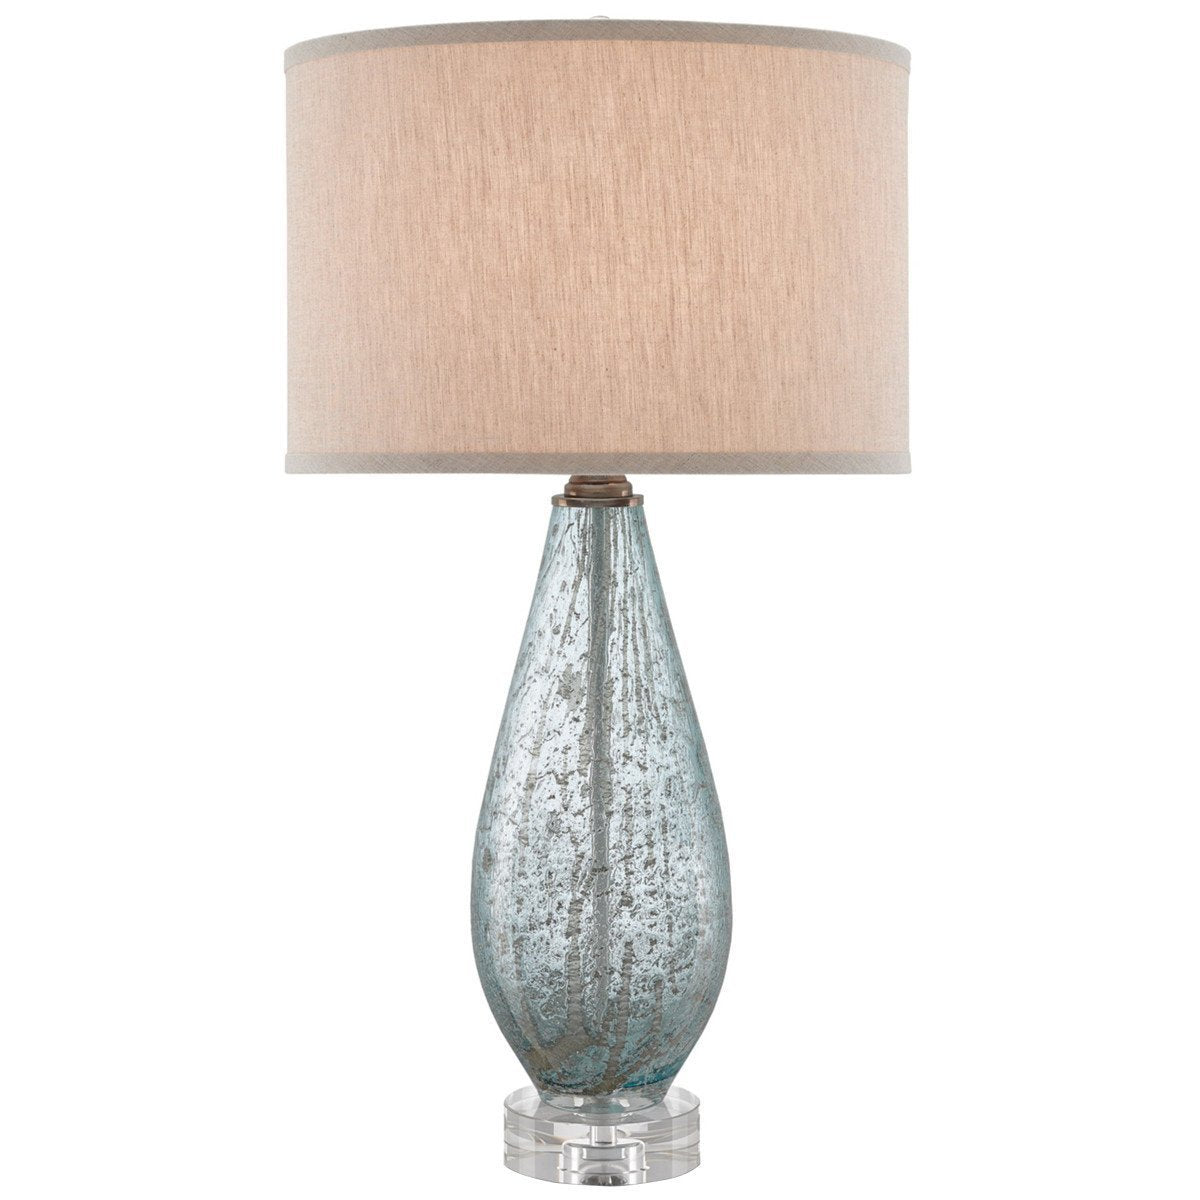 Currey and Company Optimist Table Lamp